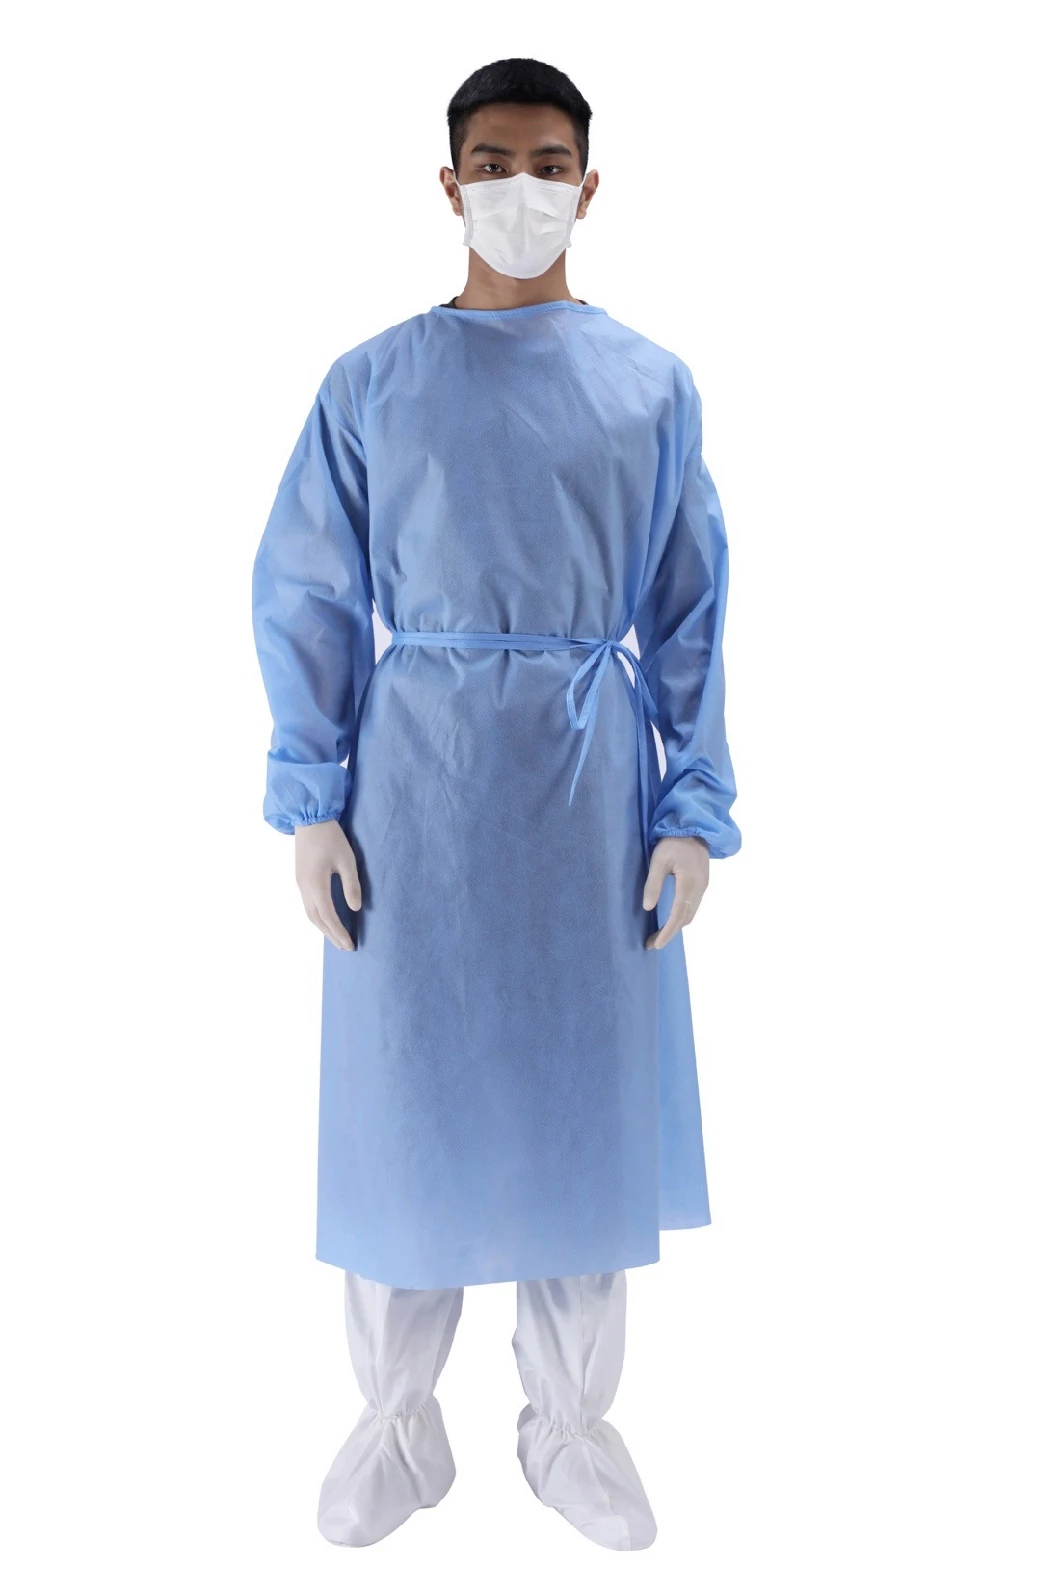 En13795 Medical Disposable Cloth Surgical Gowns Coverall En13795 Medical Disposable Cloth Surgical Gown